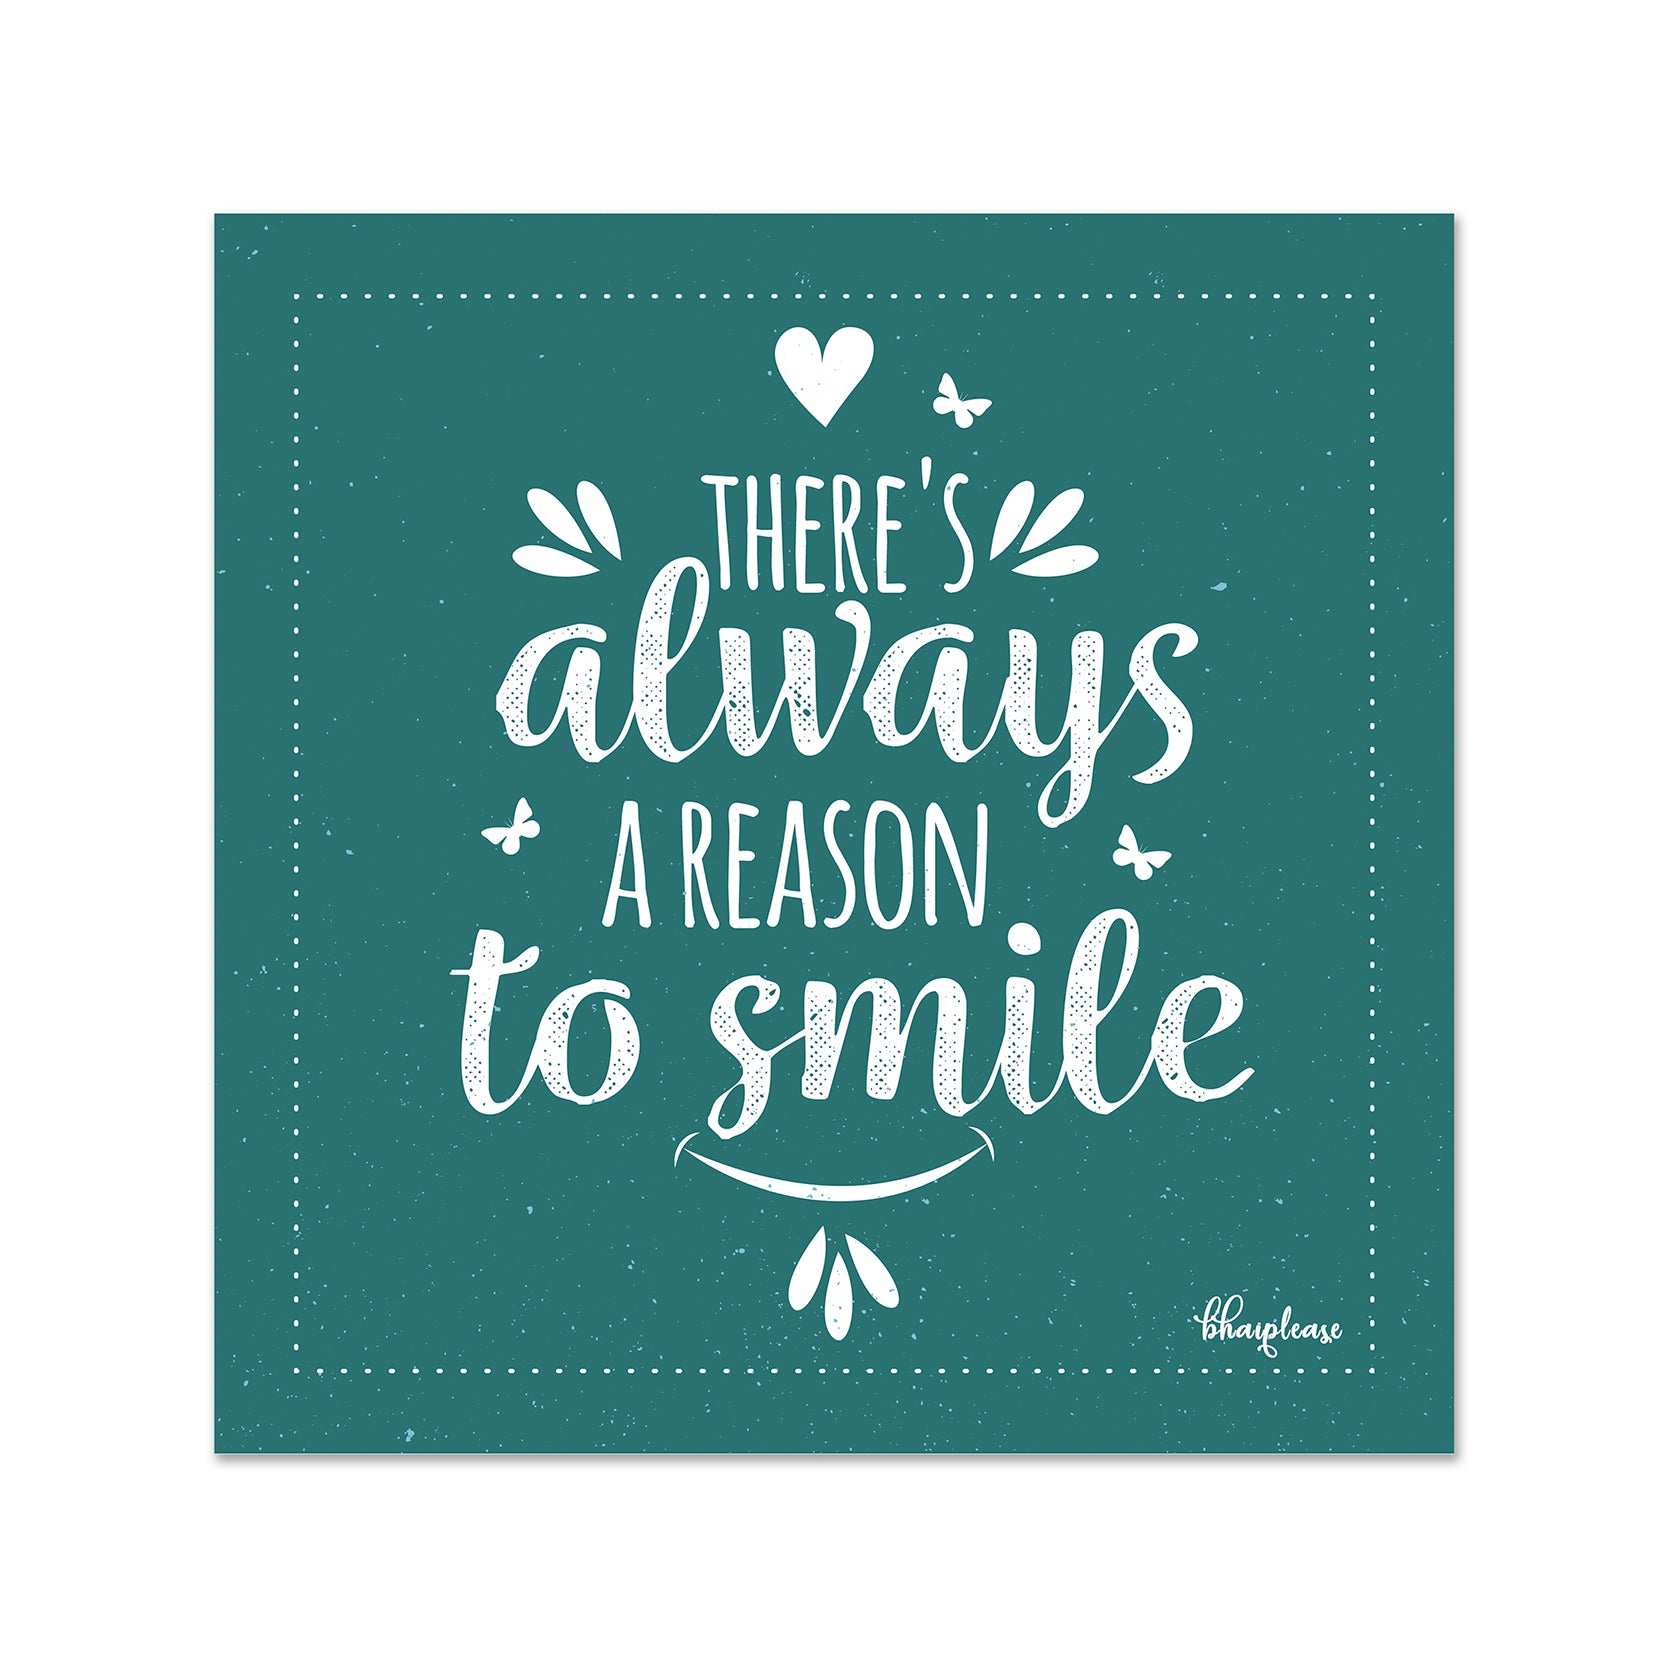 There's Always a Reason to Smile Wooden Fridge / Refrigerator Magnet